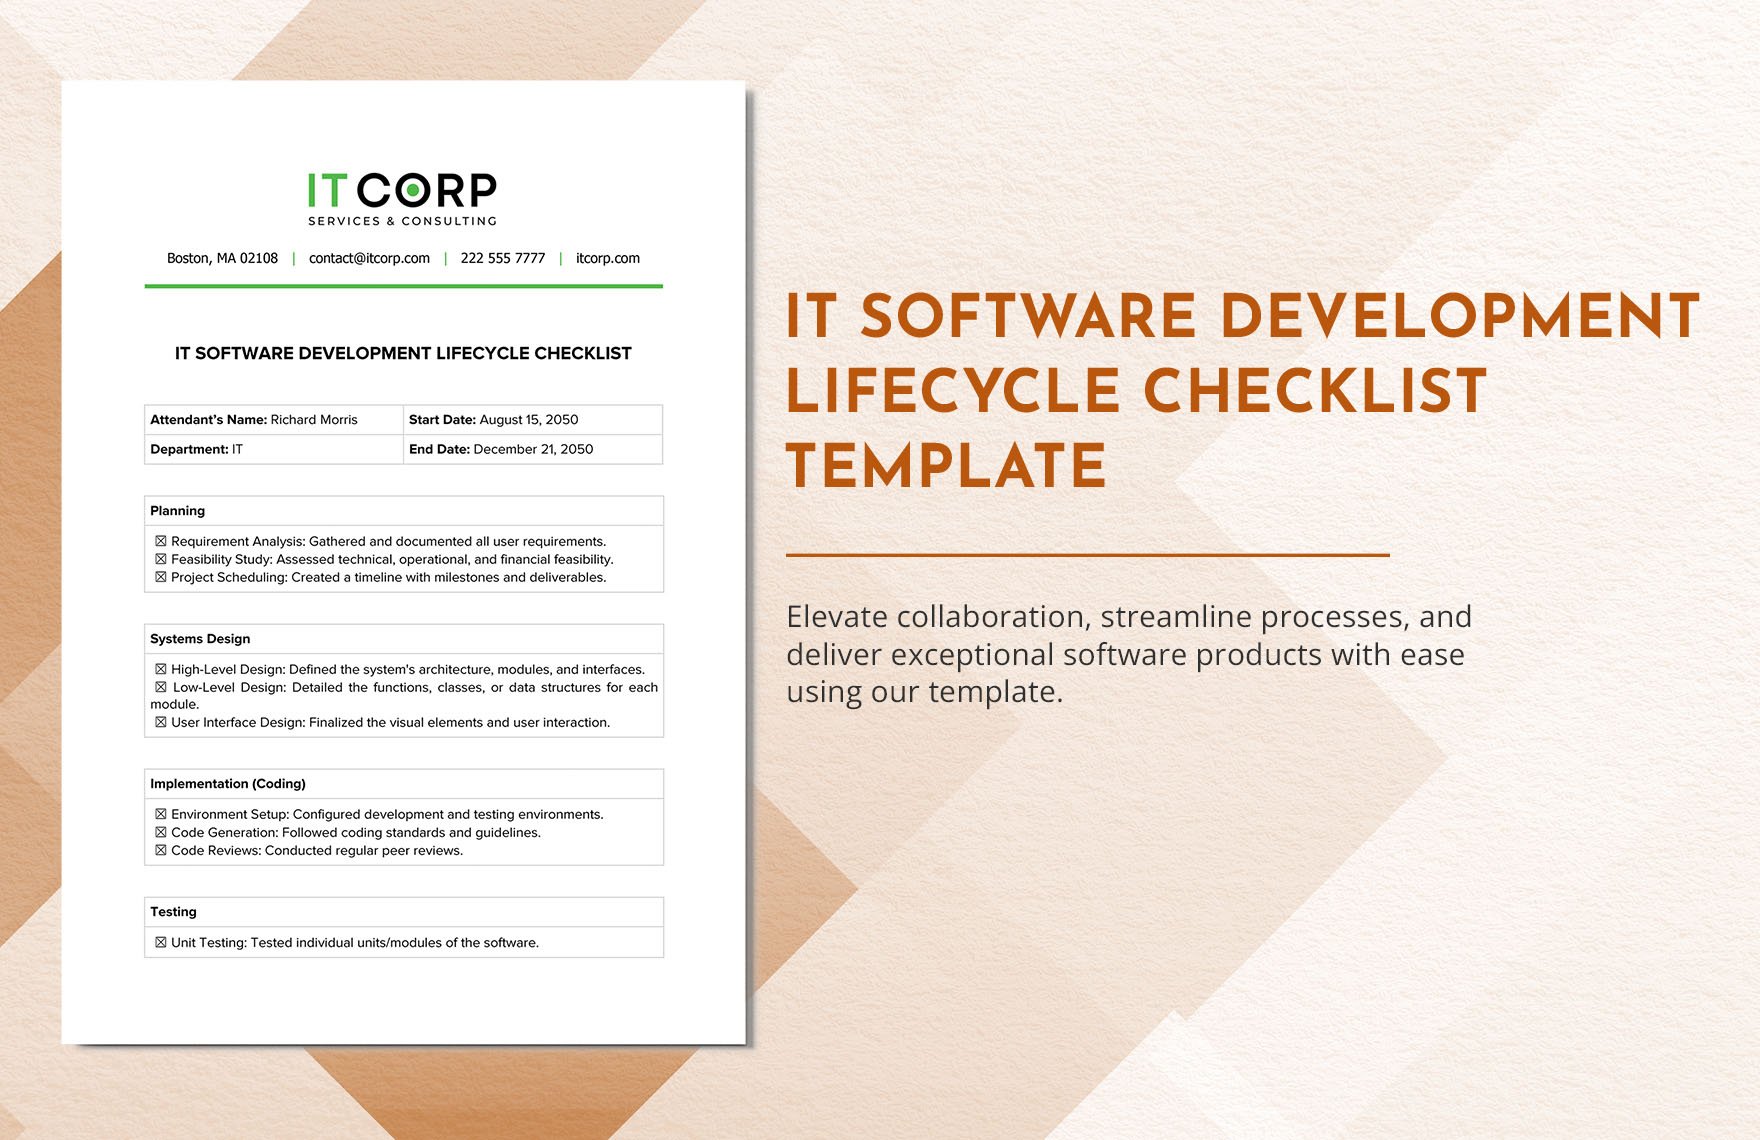 IT Software Development Lifecycle Checklist Template